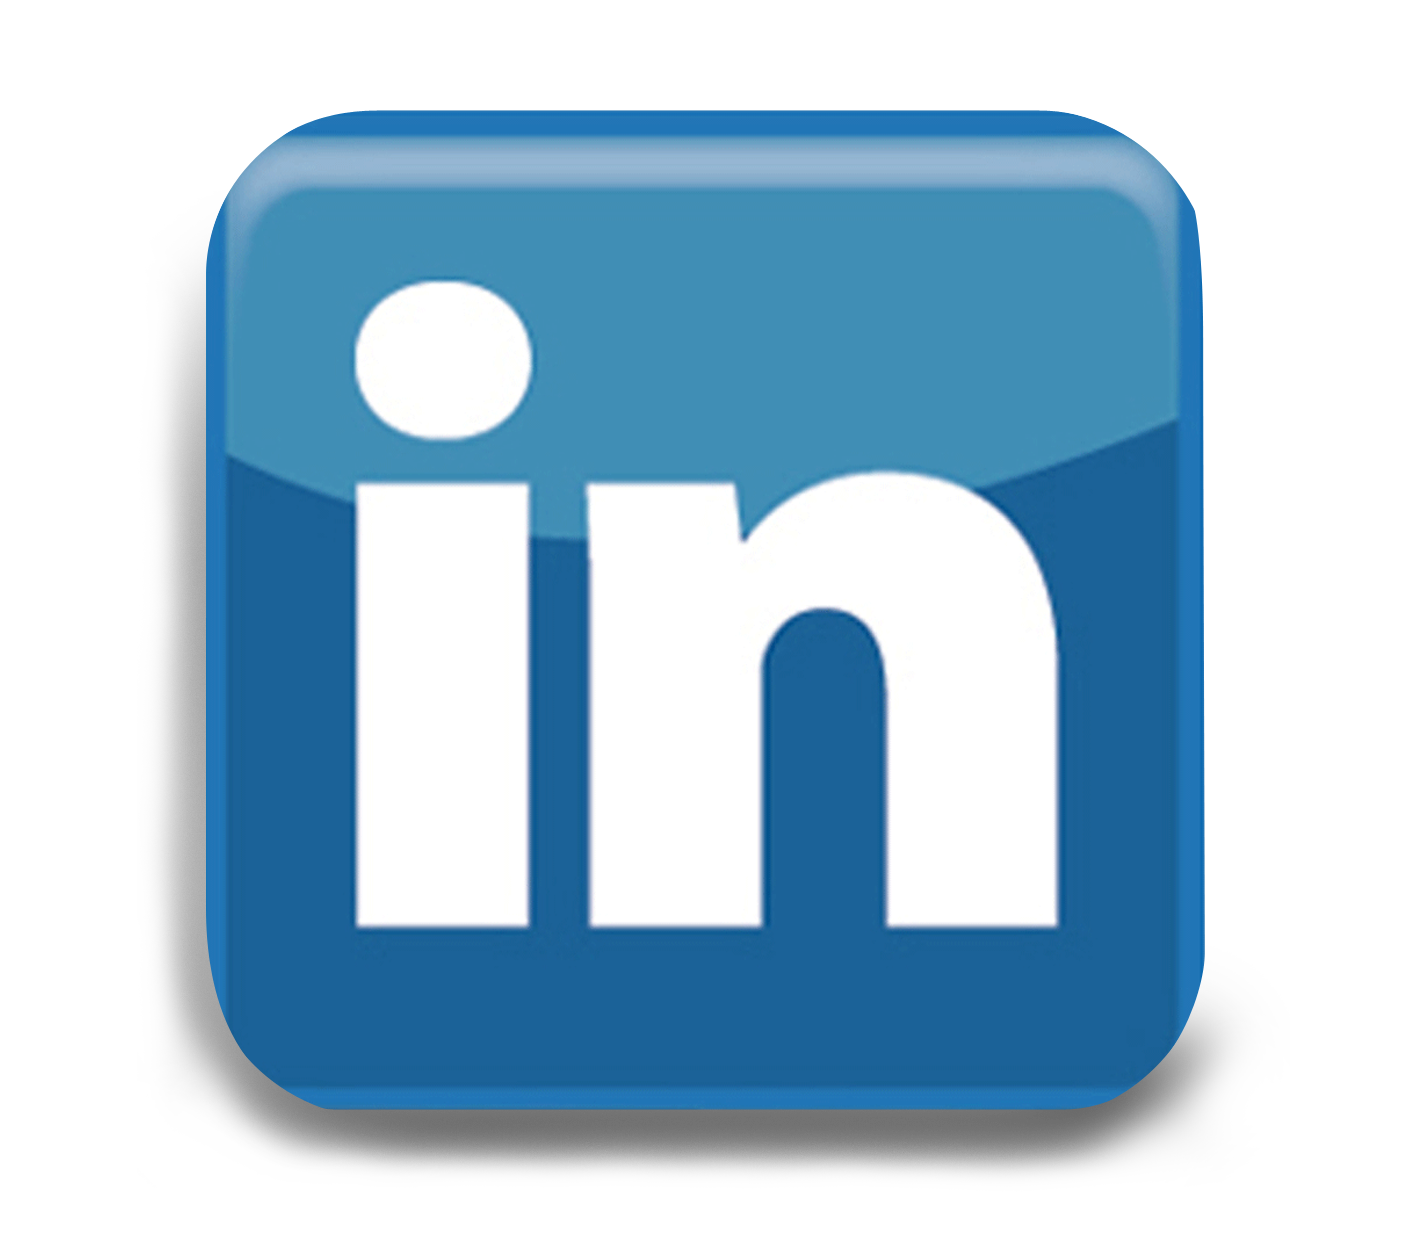 The Ultimate Guide to LinkedIn Advertising - McGaw.io